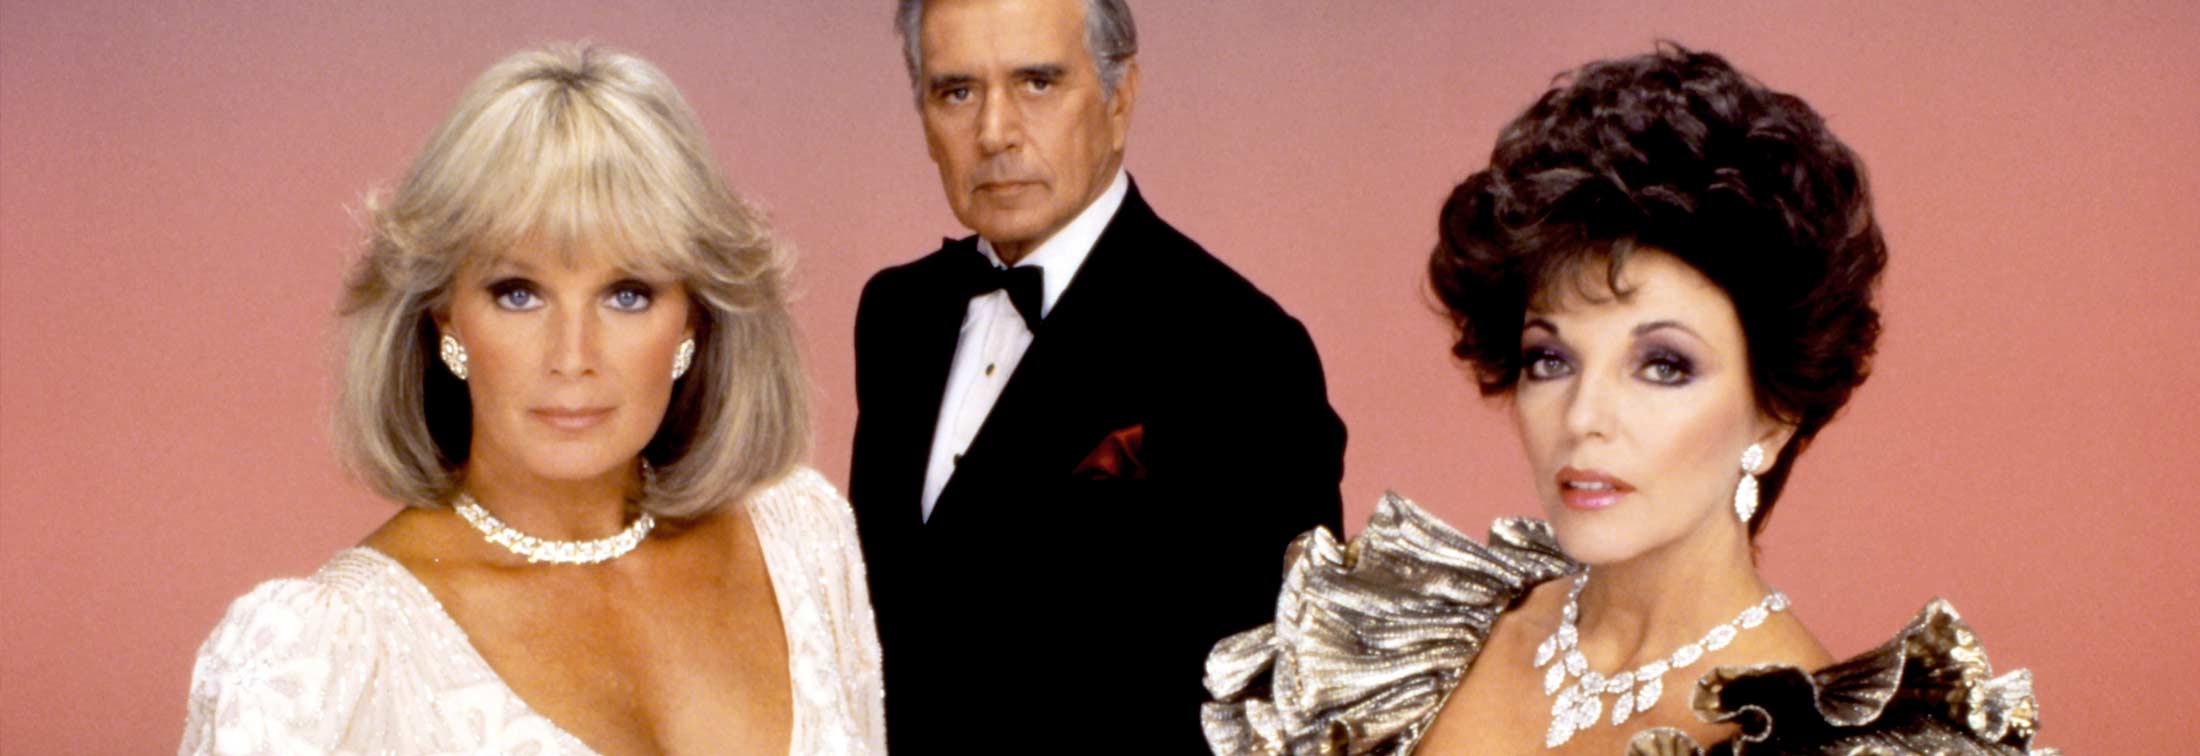 Dynasty: The Complete Series - Bring home the most dramatic family on television